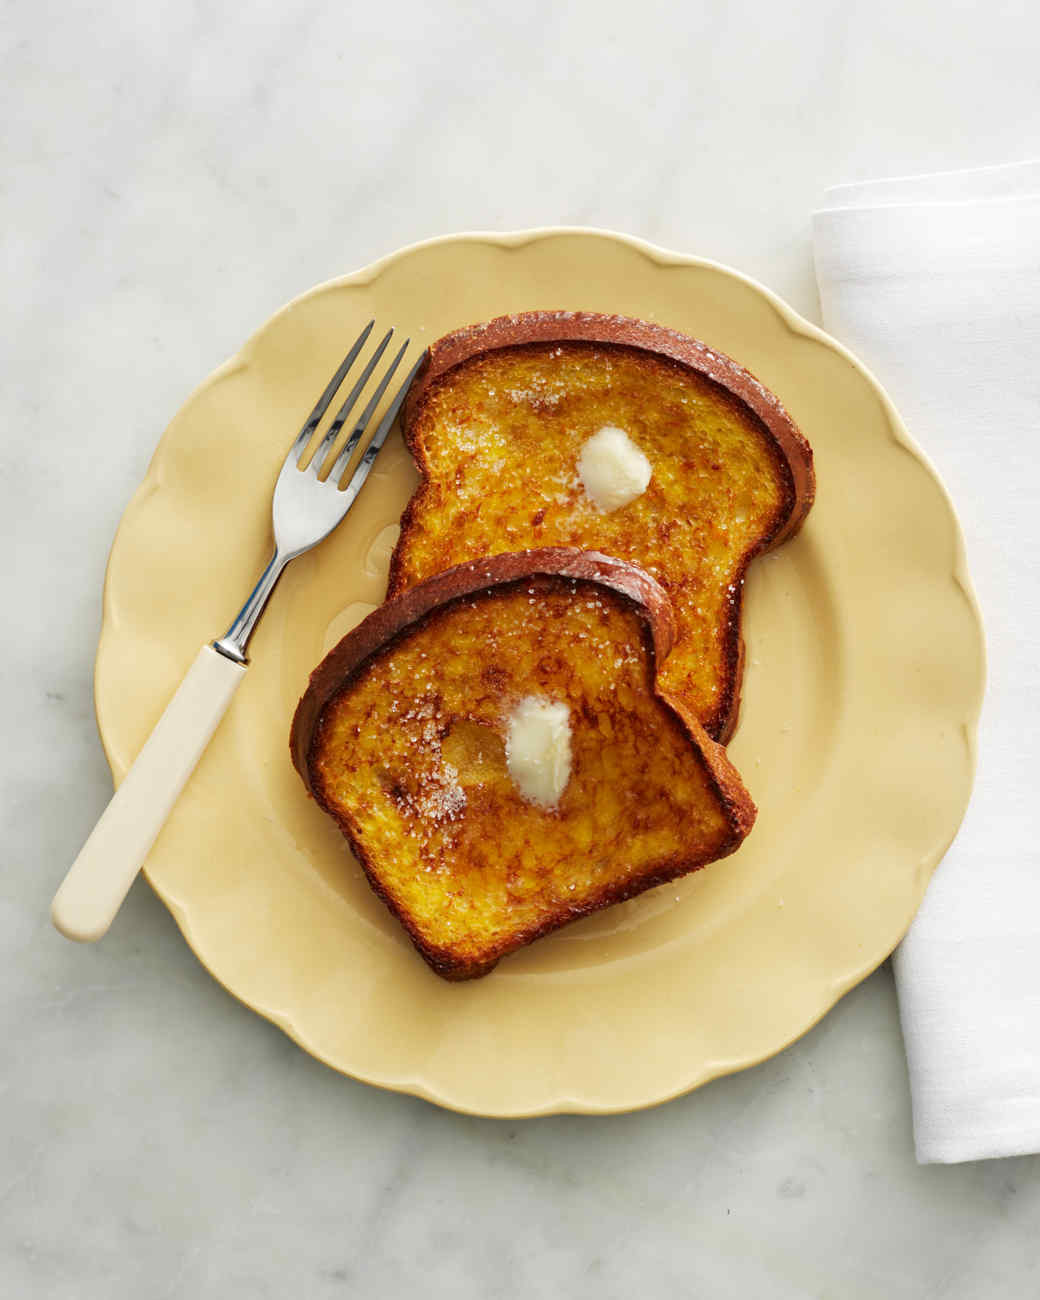 Martha Stewart Baked French Toast
 Baked French Toast Recipes for an Easy Make Ahead Brunch